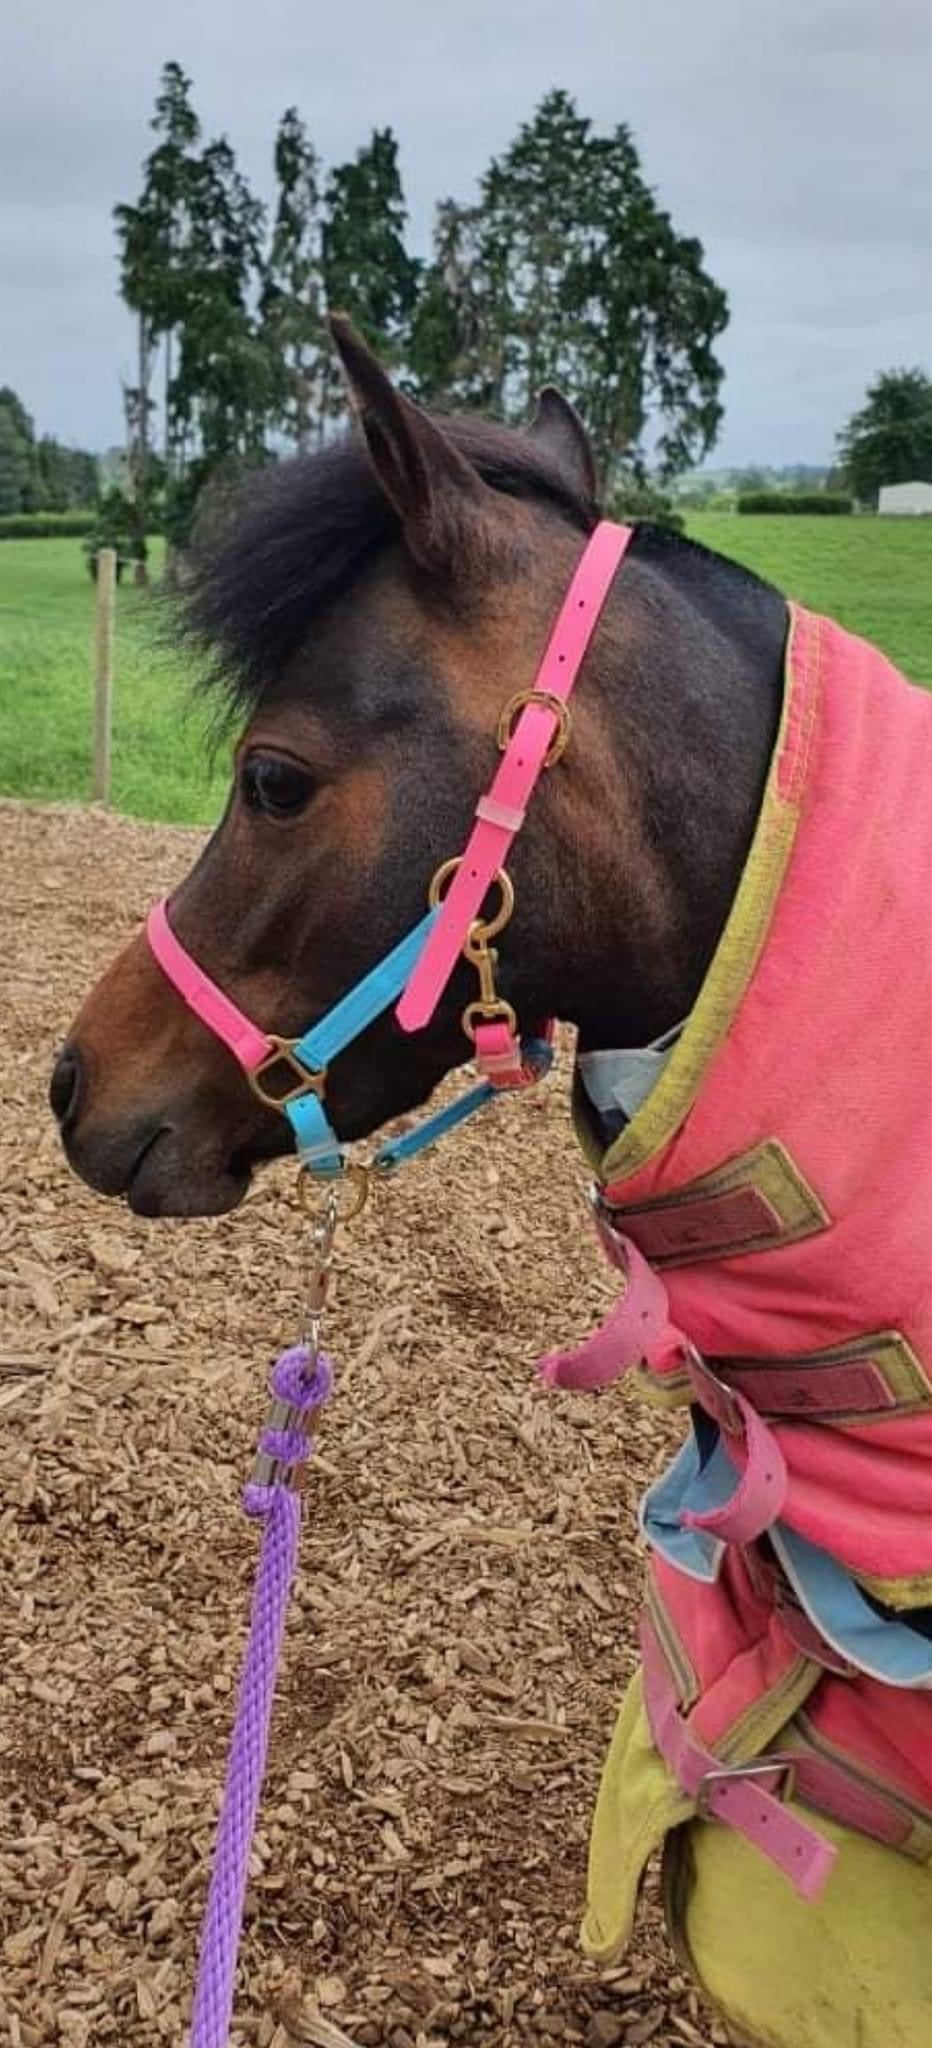 A small horse wearing a colorful LS Equestrian Design Your Own - LS Halter with pink and blue straps and a pink and yellow blanket stands on woodchip ground, secured with a purple lead rope, in an outdoor setting with green grass and trees in the background.